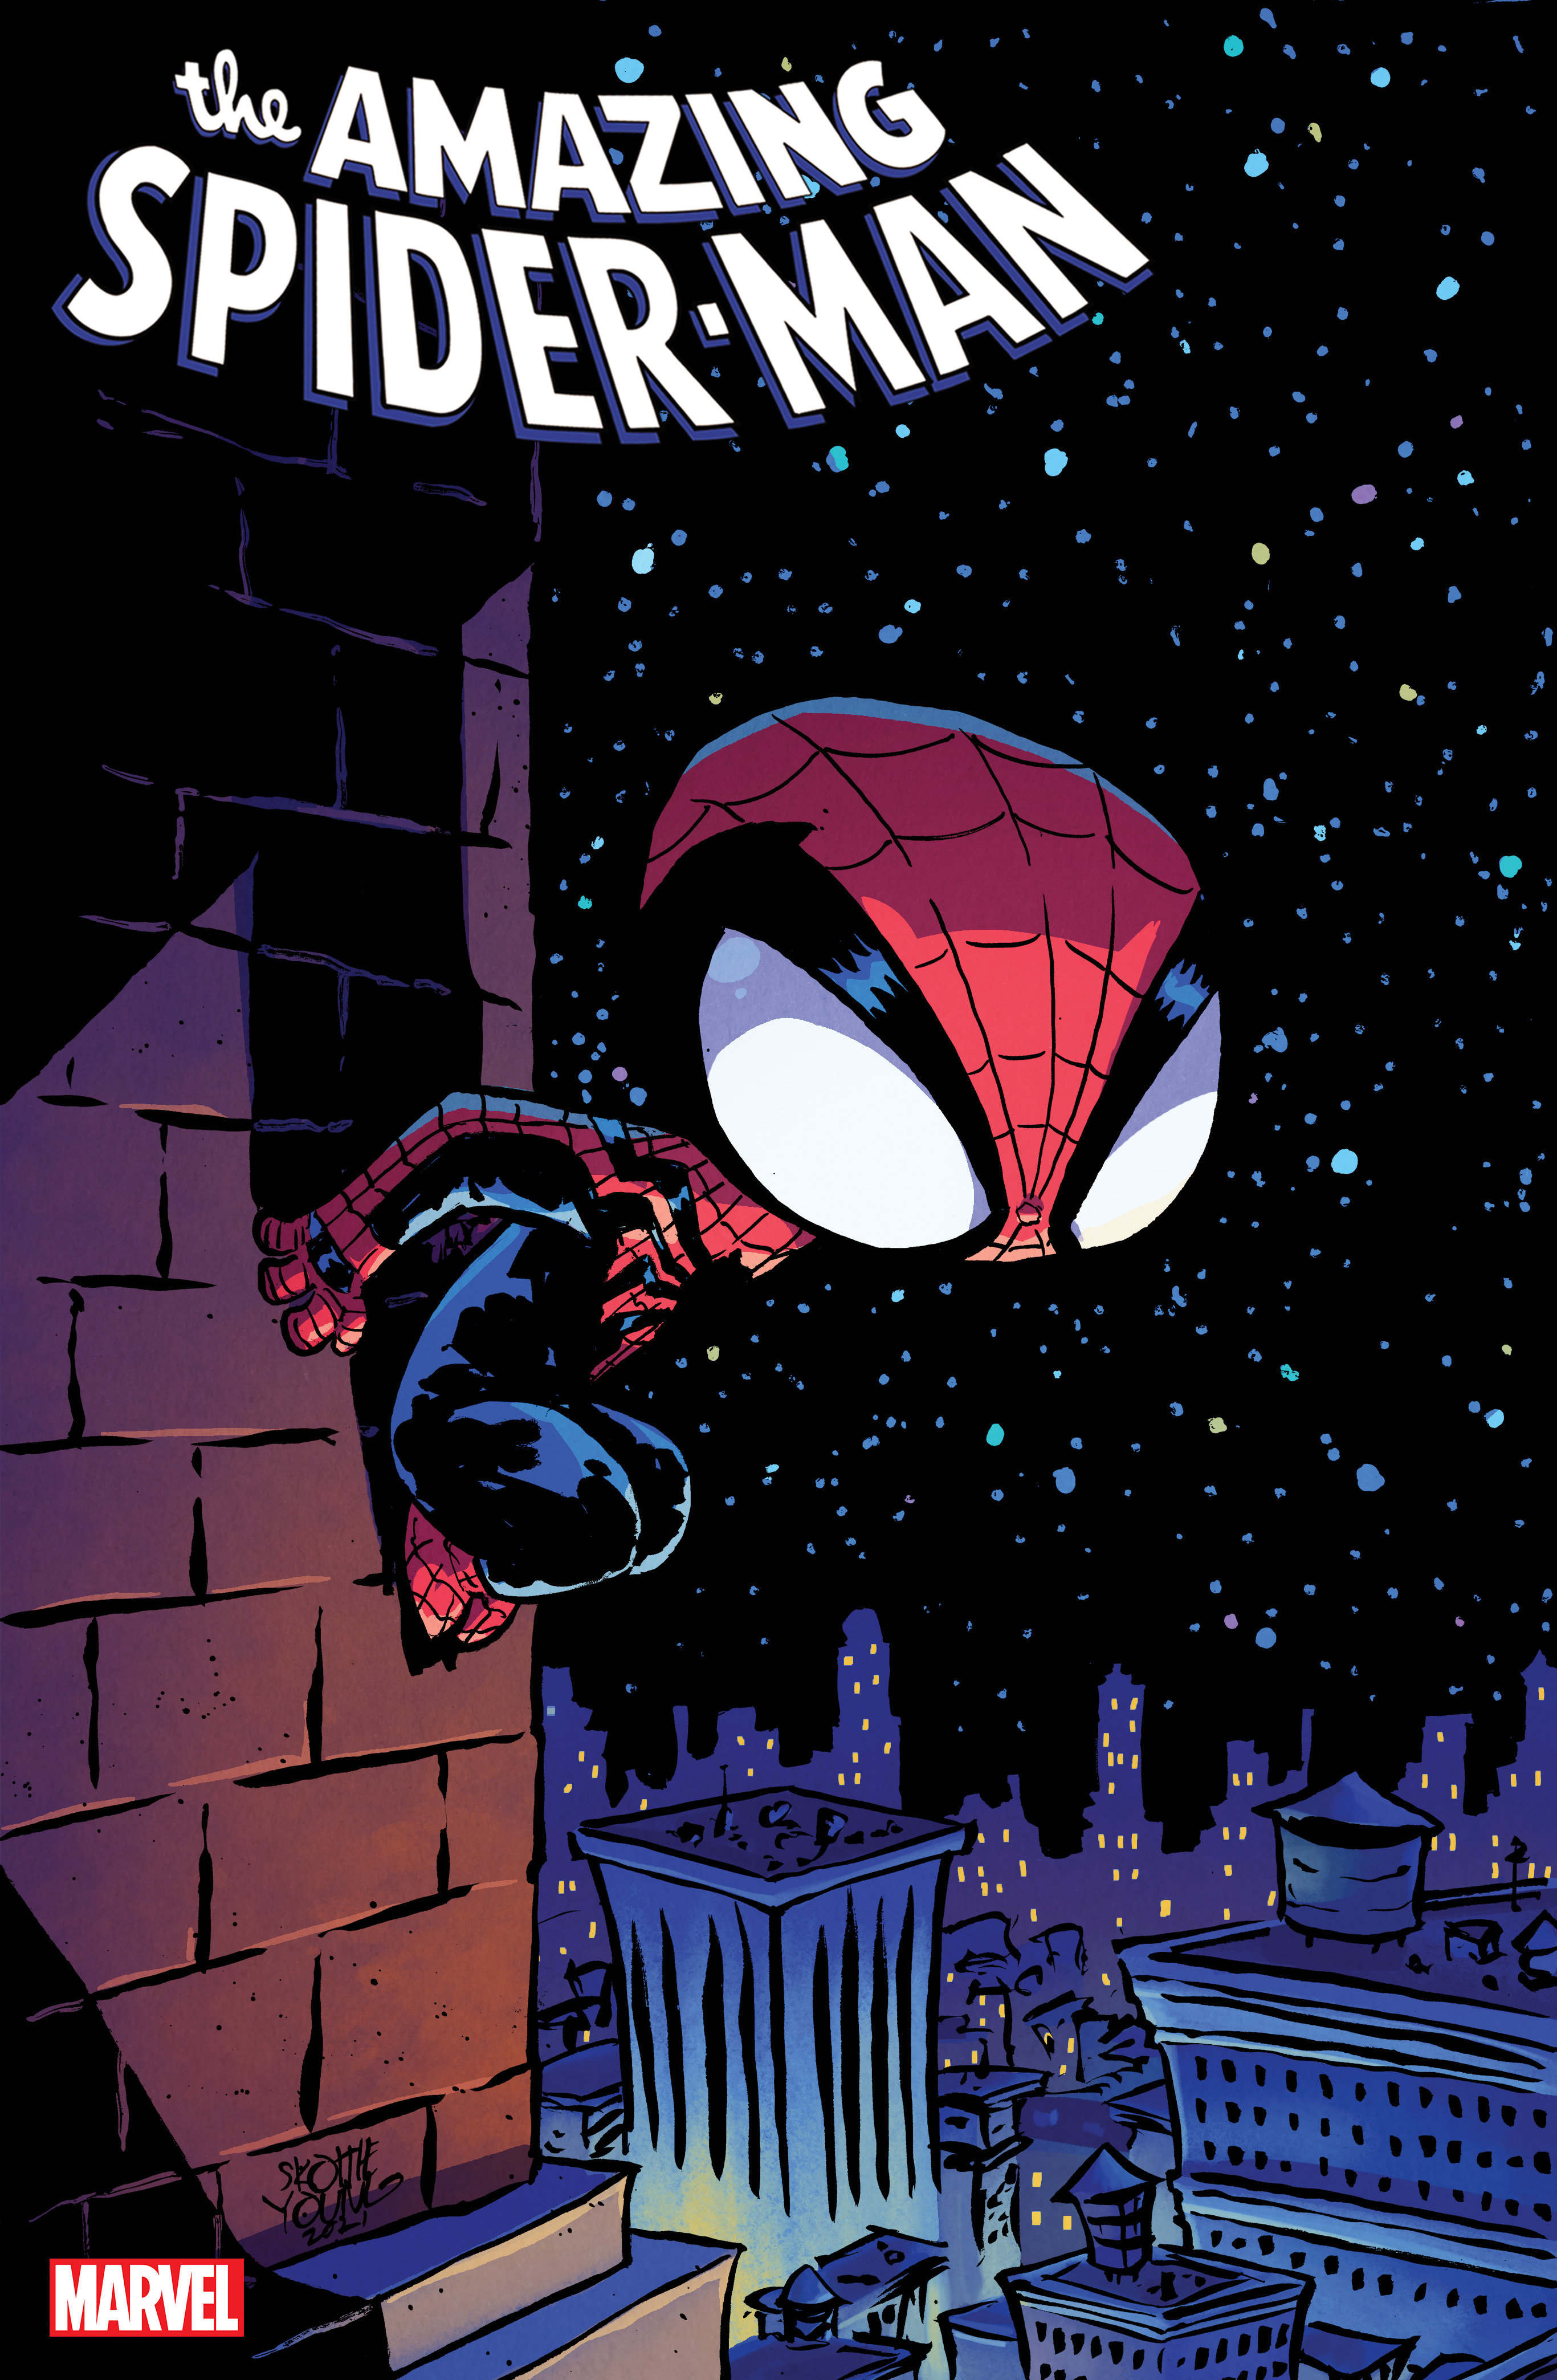 Amazing Spider-Man #75 Beyond Young Variant (2018)